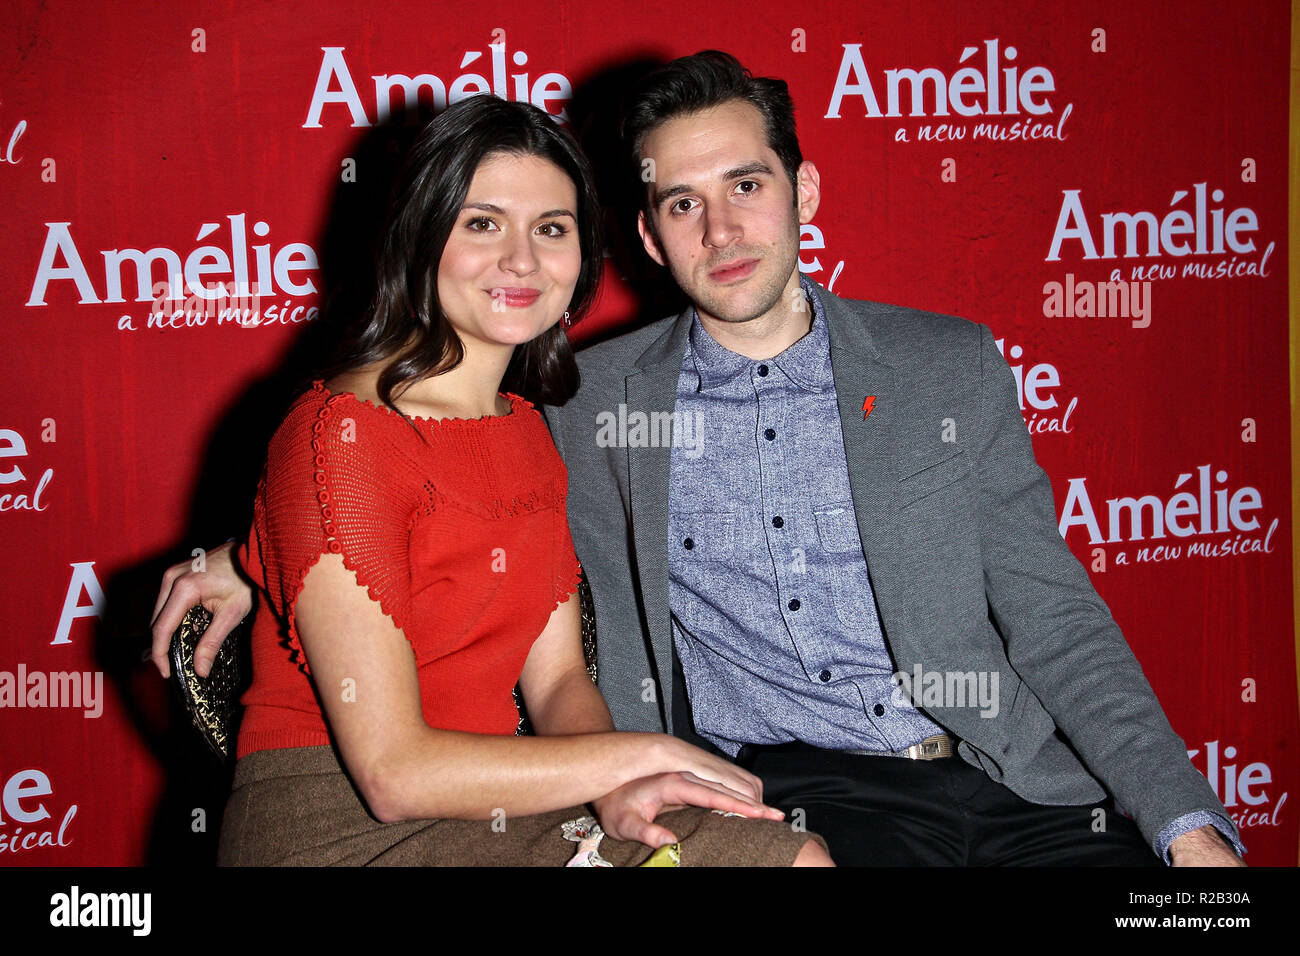 NEW YORK, NY - FEBRUARY 10:  Phillipa Soo and Adam Chanler-Berat attend the "Amelie" Broadway Musical Sneak Peek Concert at The Cutting Room on February 10, 2017 in New York City.  (Photo by Steve Mack/S.D. Mack Pictures) Stock Photo